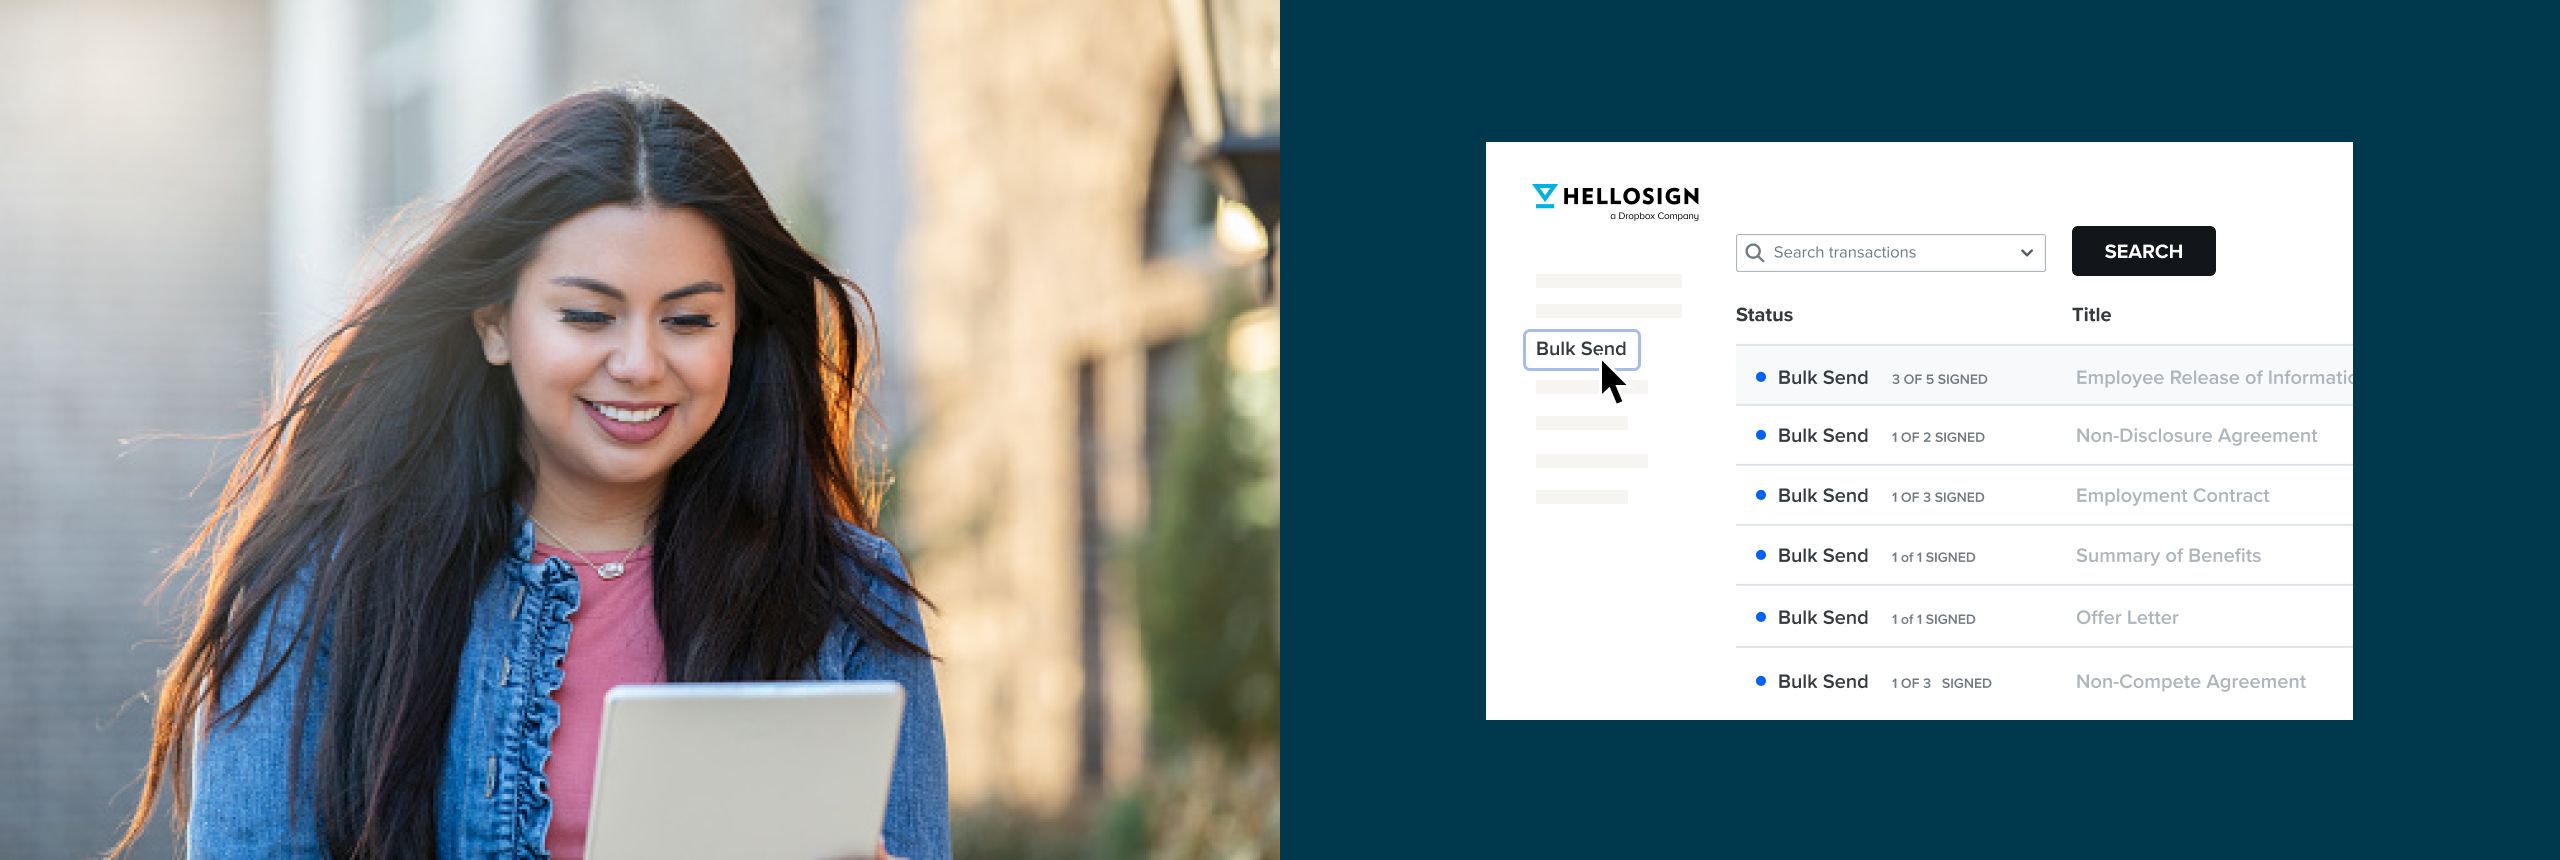 Split-pane image. Photo of a smiling woman, walking along a city street, and looking at a notepad on the left, product shot on the right.